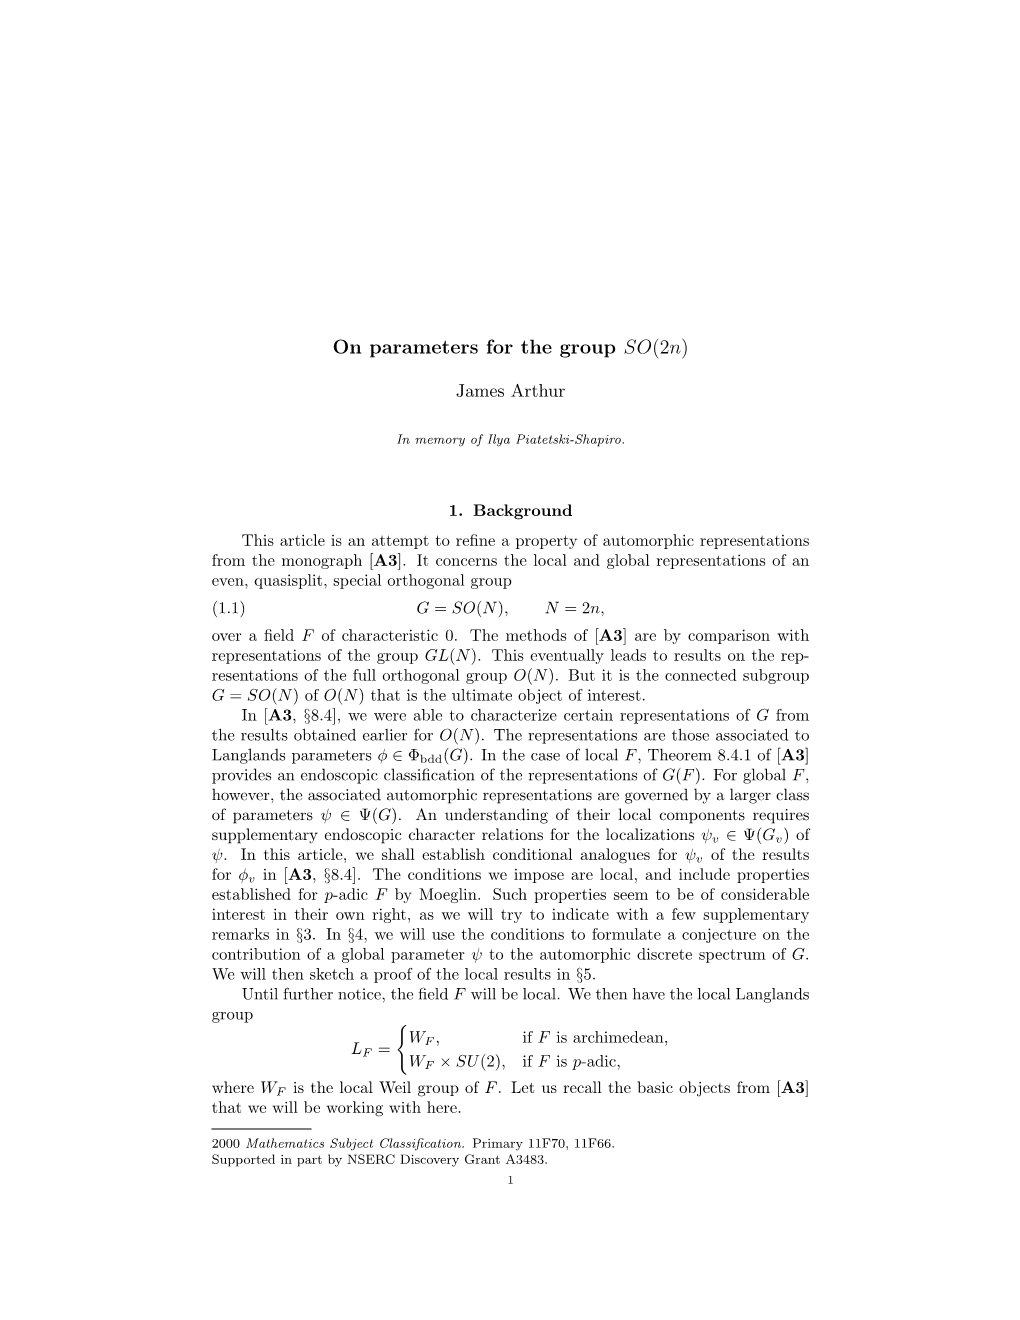 On Parameters for the Group SO(2N)